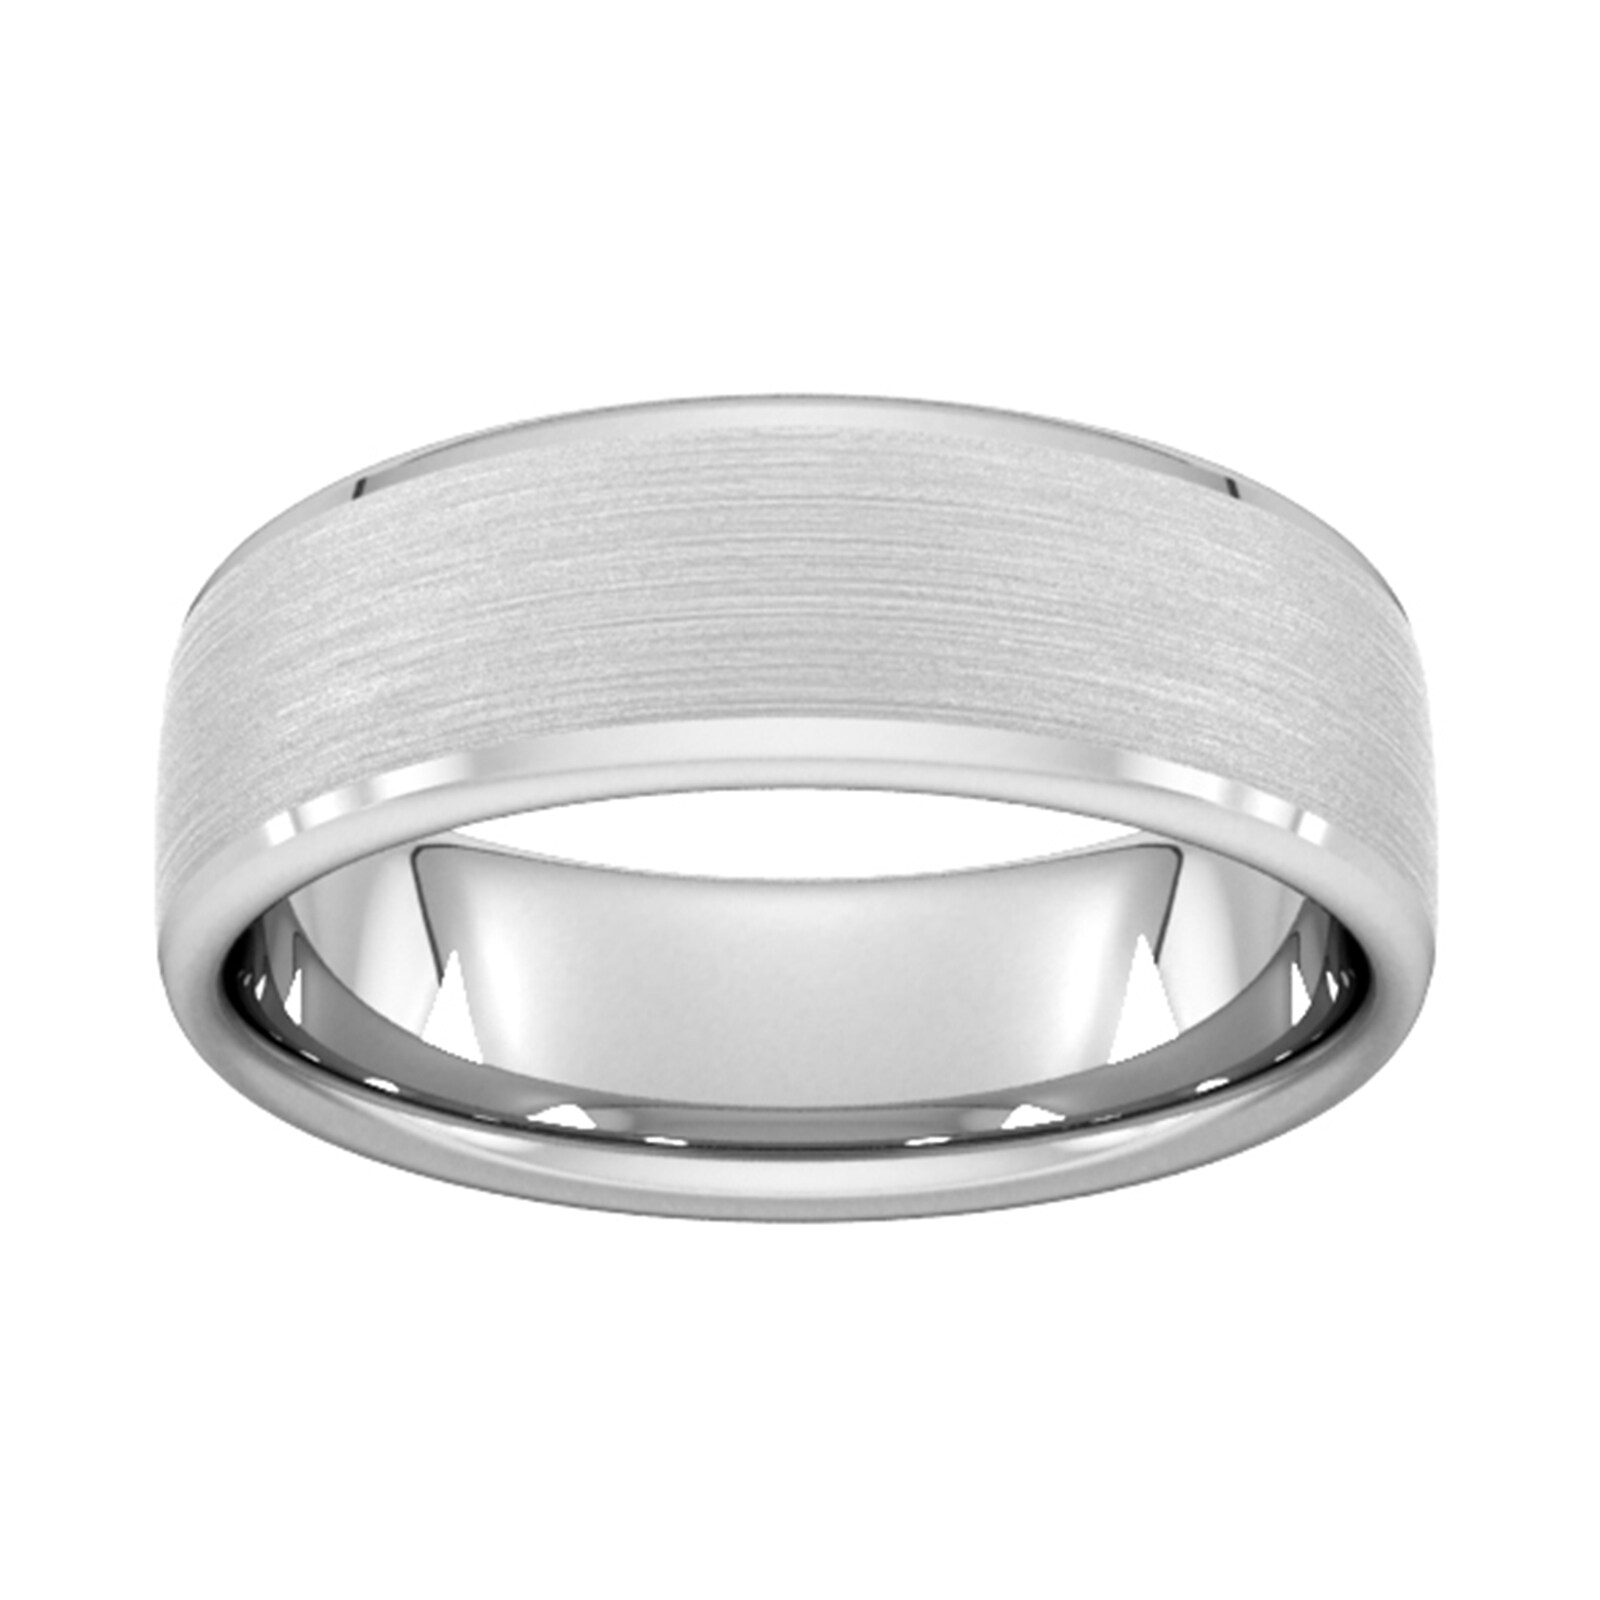 7mm Slight Court Heavy Polished Chamfered Edges With Matt Centre Wedding Ring In 9 Carat White Gold - Ring Size O